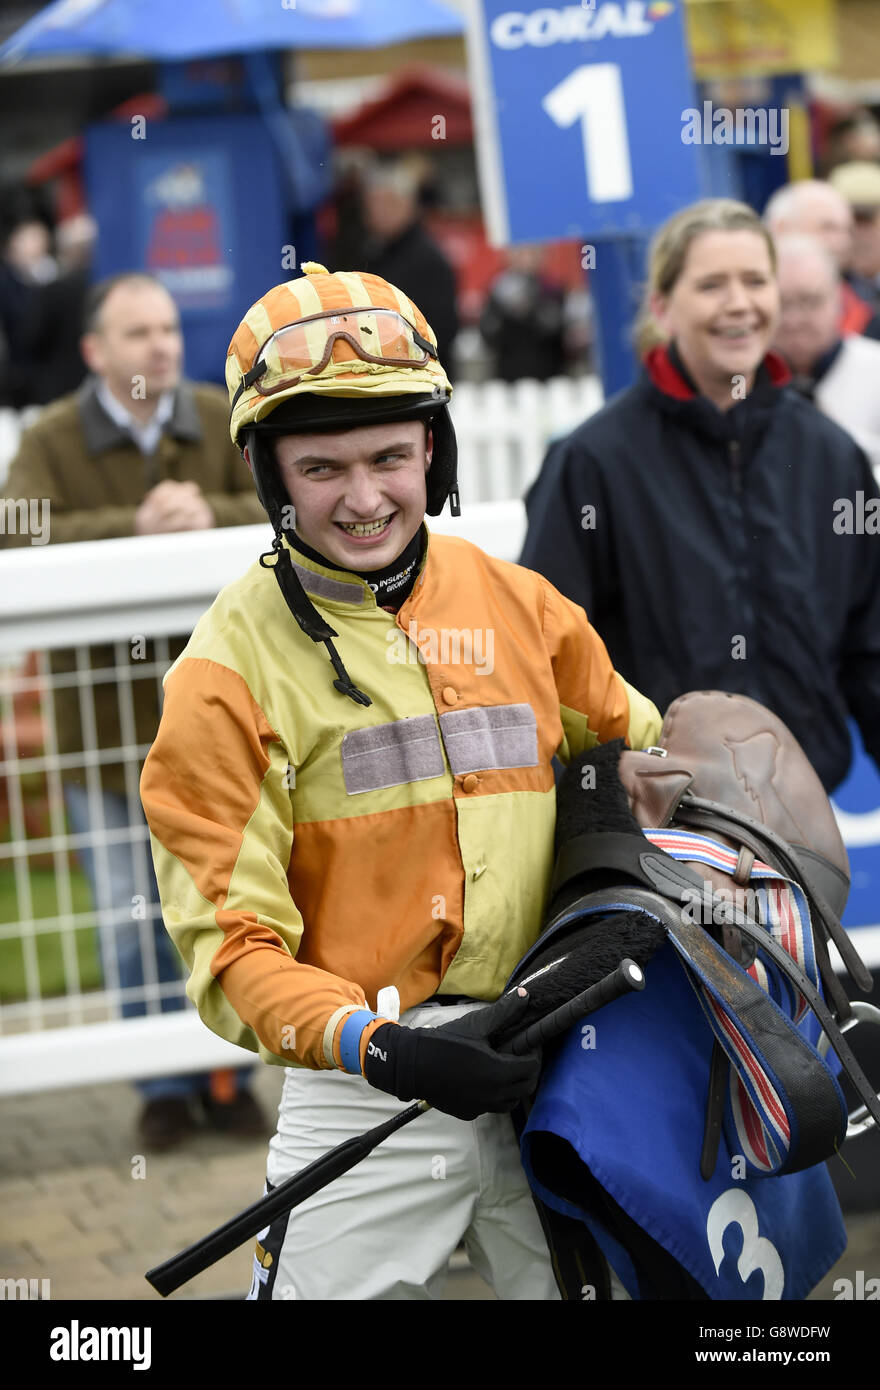 Jockey Sean Bowen after winning the coral.co.uk Mares' Handicap Hurdle Race on Ron's Dream during Ladies Day of the Coral Scottish Grand National Festival at Ayr Racecourse. Stock Photo